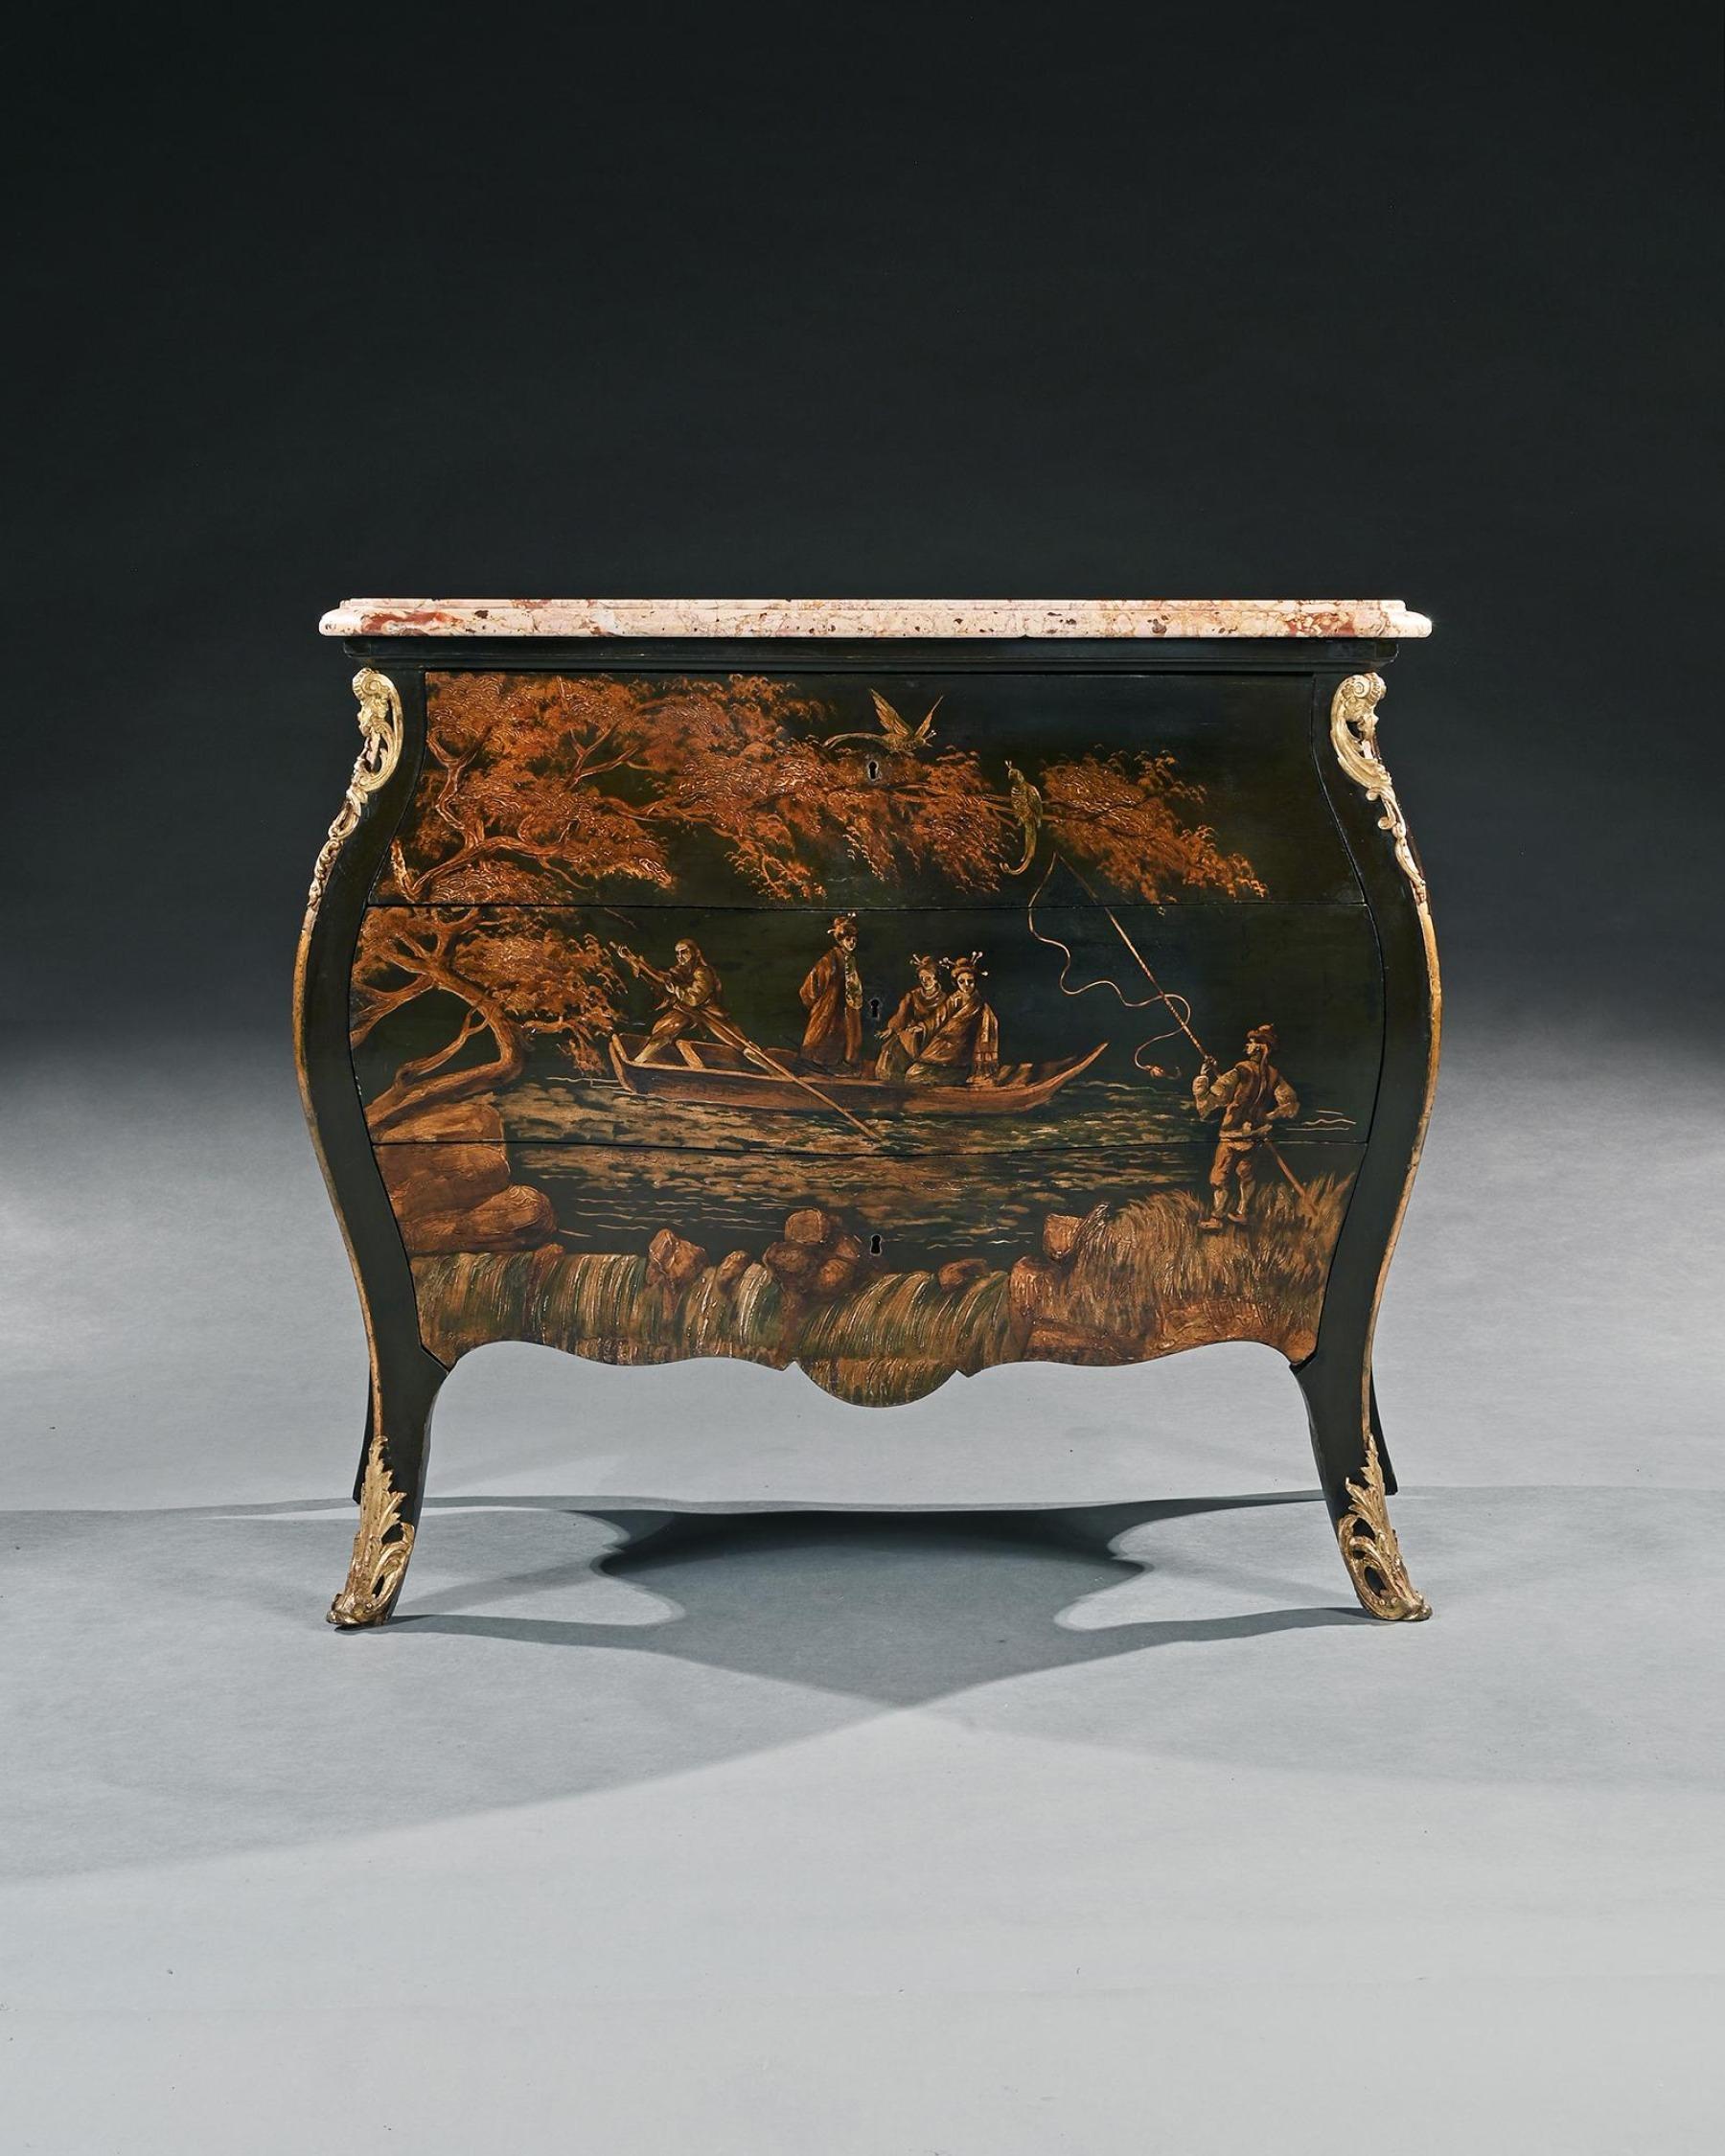 A Fine and Decorative Late 19th Century French Bombe Commode with Painted or 